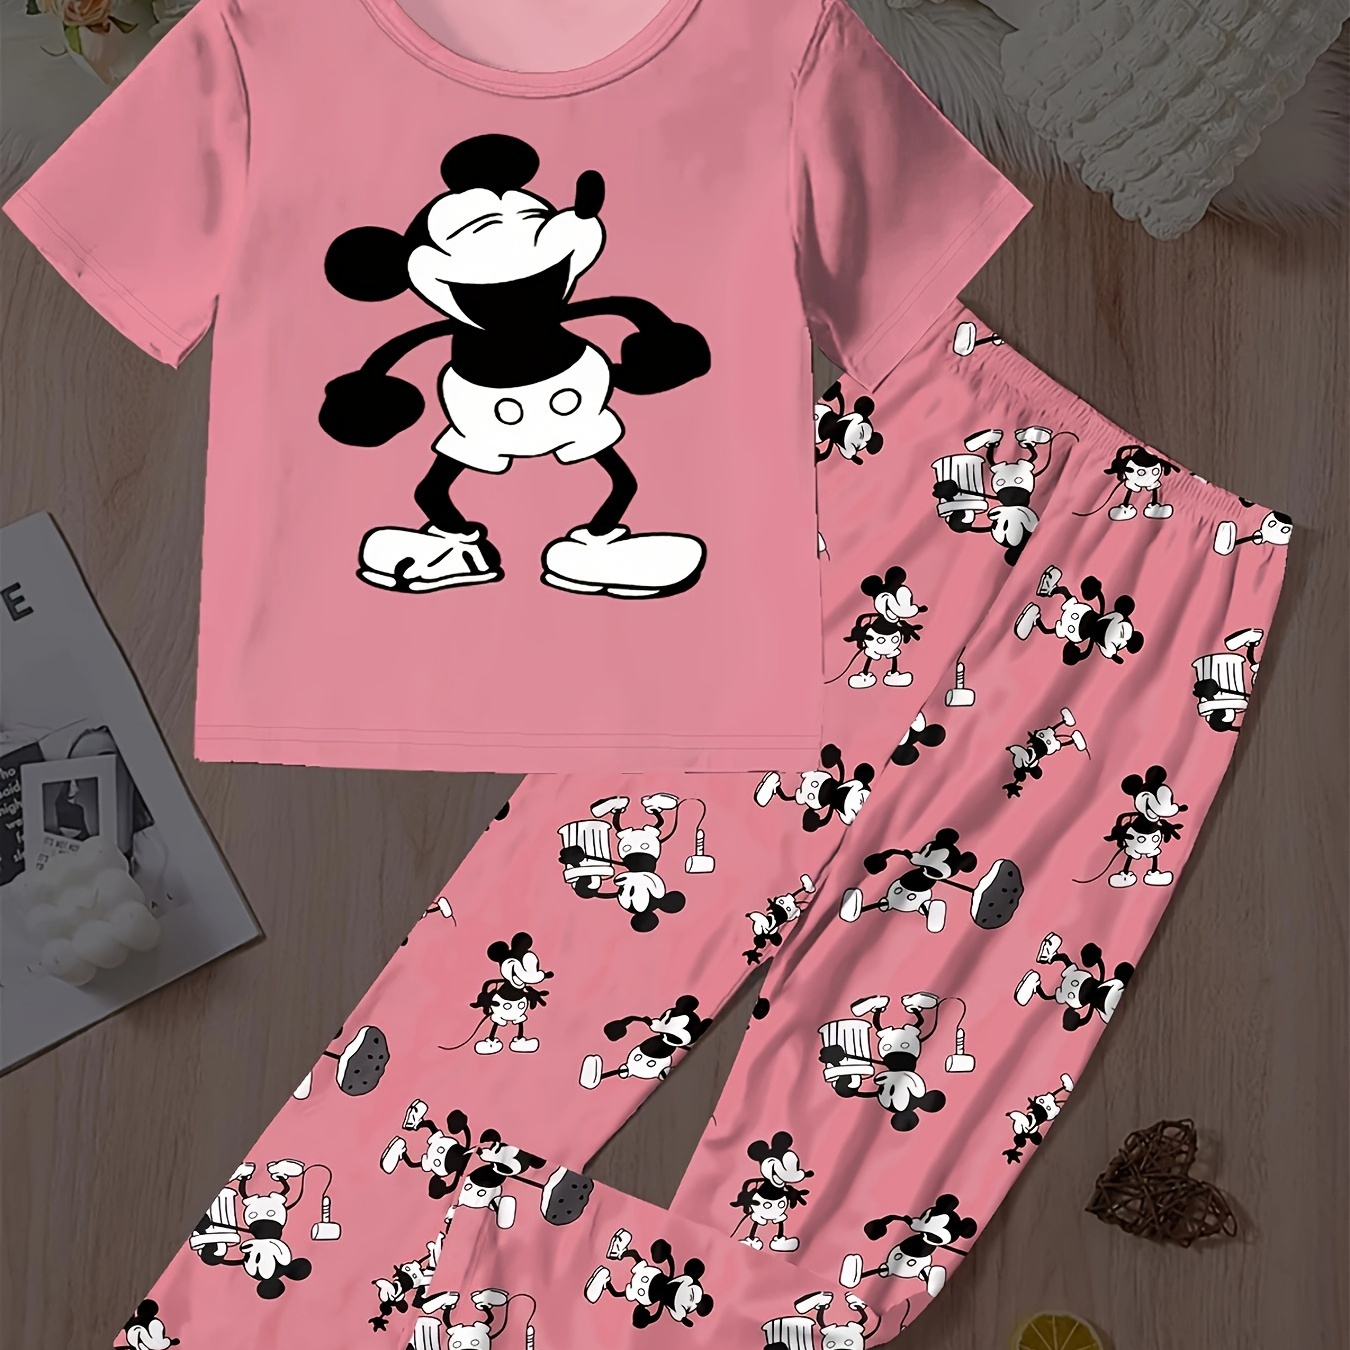 

Women's Cartoon Mouse Print Cute Pajama Set, Round Neck Short Sleeve Top & Pants, Comfortable Relaxed Fit, Summer Nightwear